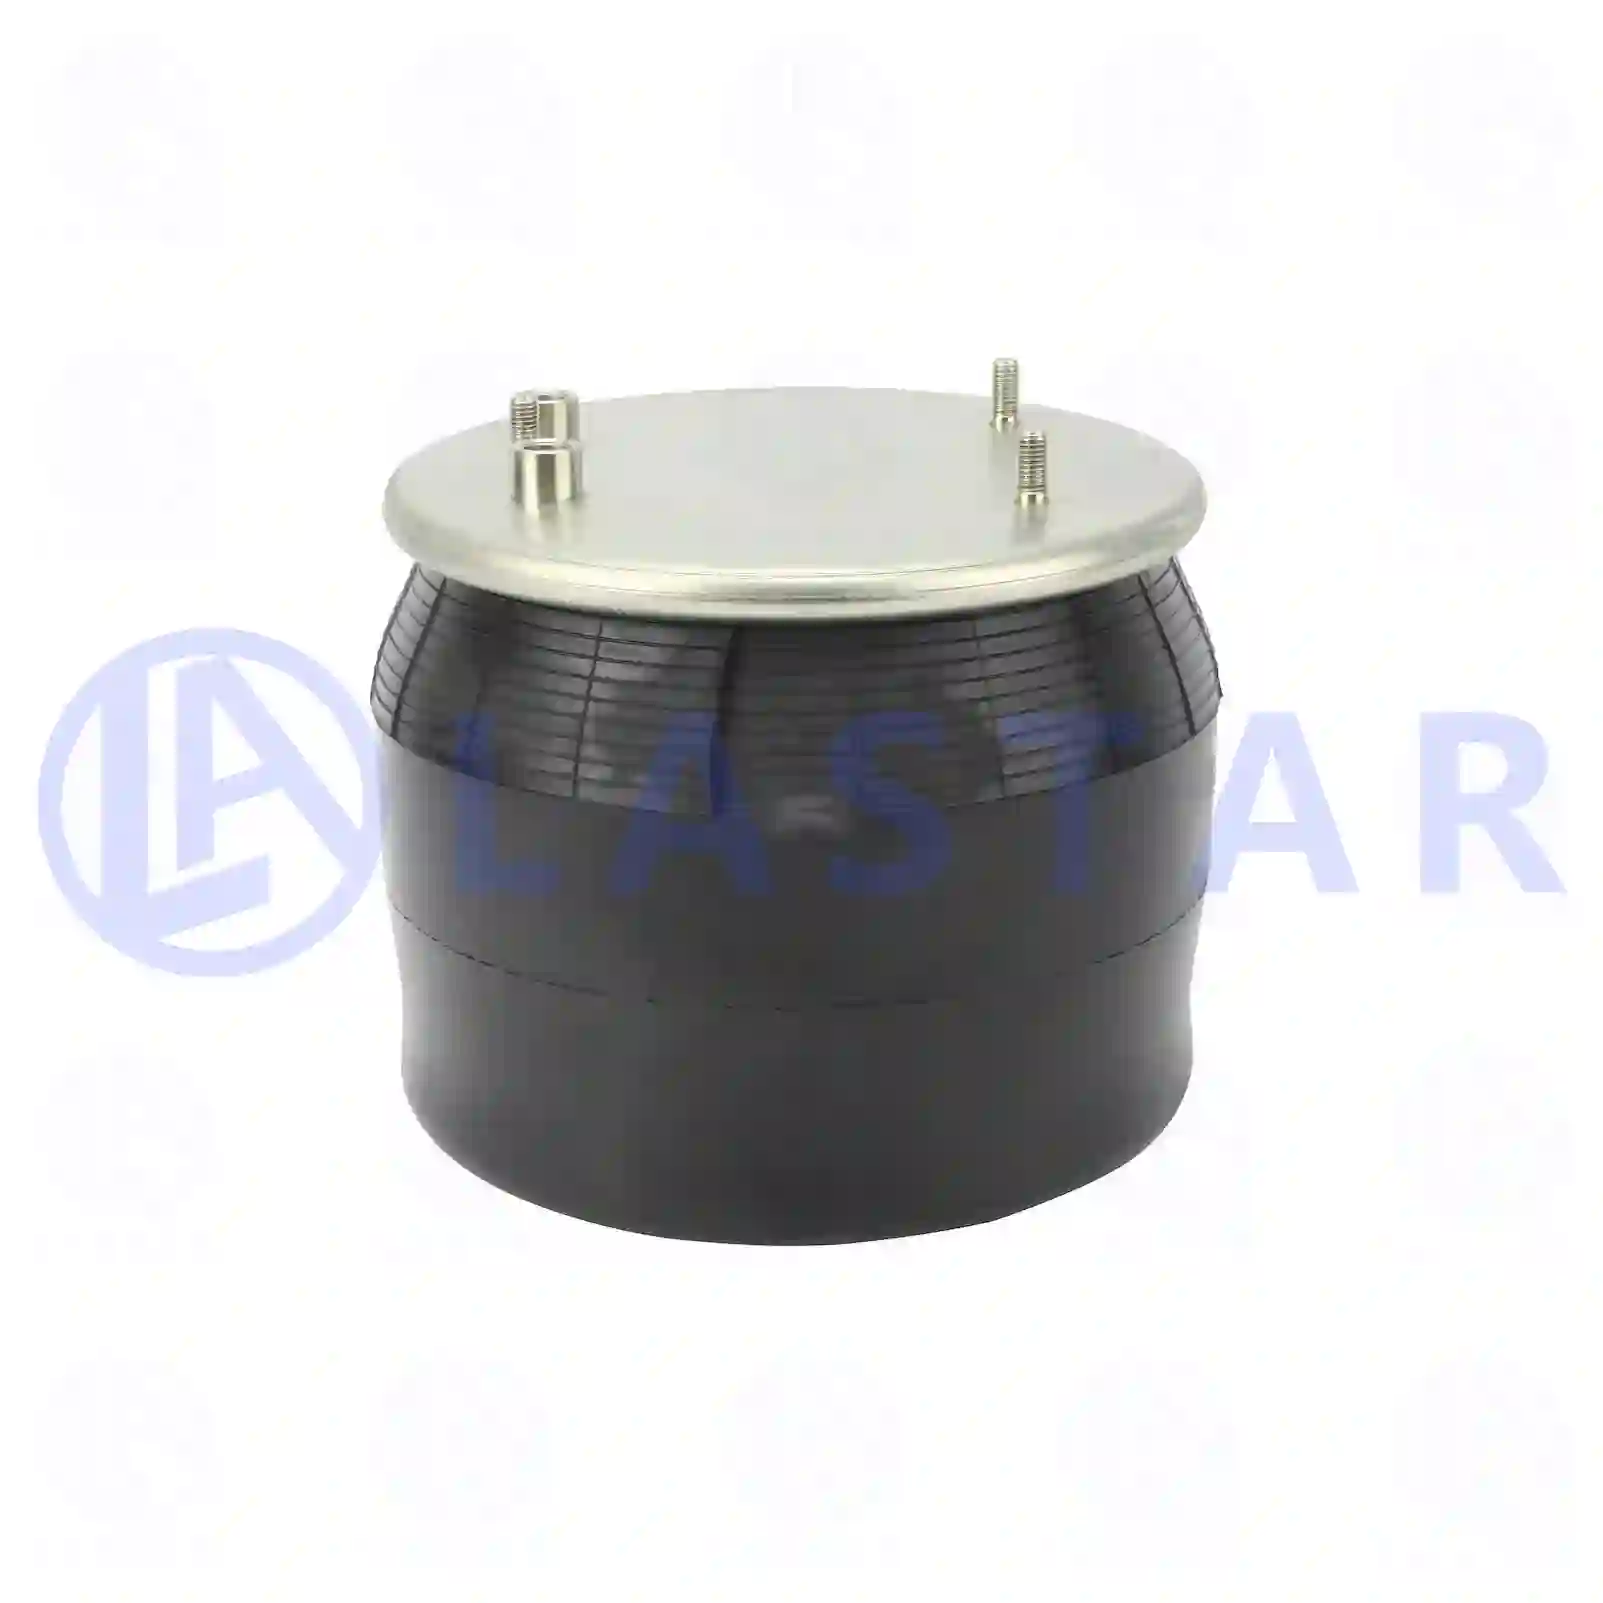 Air spring, with steel piston, 77728496, 0388167, 0388168, 388167, 388168, MLF7059 ||  77728496 Lastar Spare Part | Truck Spare Parts, Auotomotive Spare Parts Air spring, with steel piston, 77728496, 0388167, 0388168, 388167, 388168, MLF7059 ||  77728496 Lastar Spare Part | Truck Spare Parts, Auotomotive Spare Parts